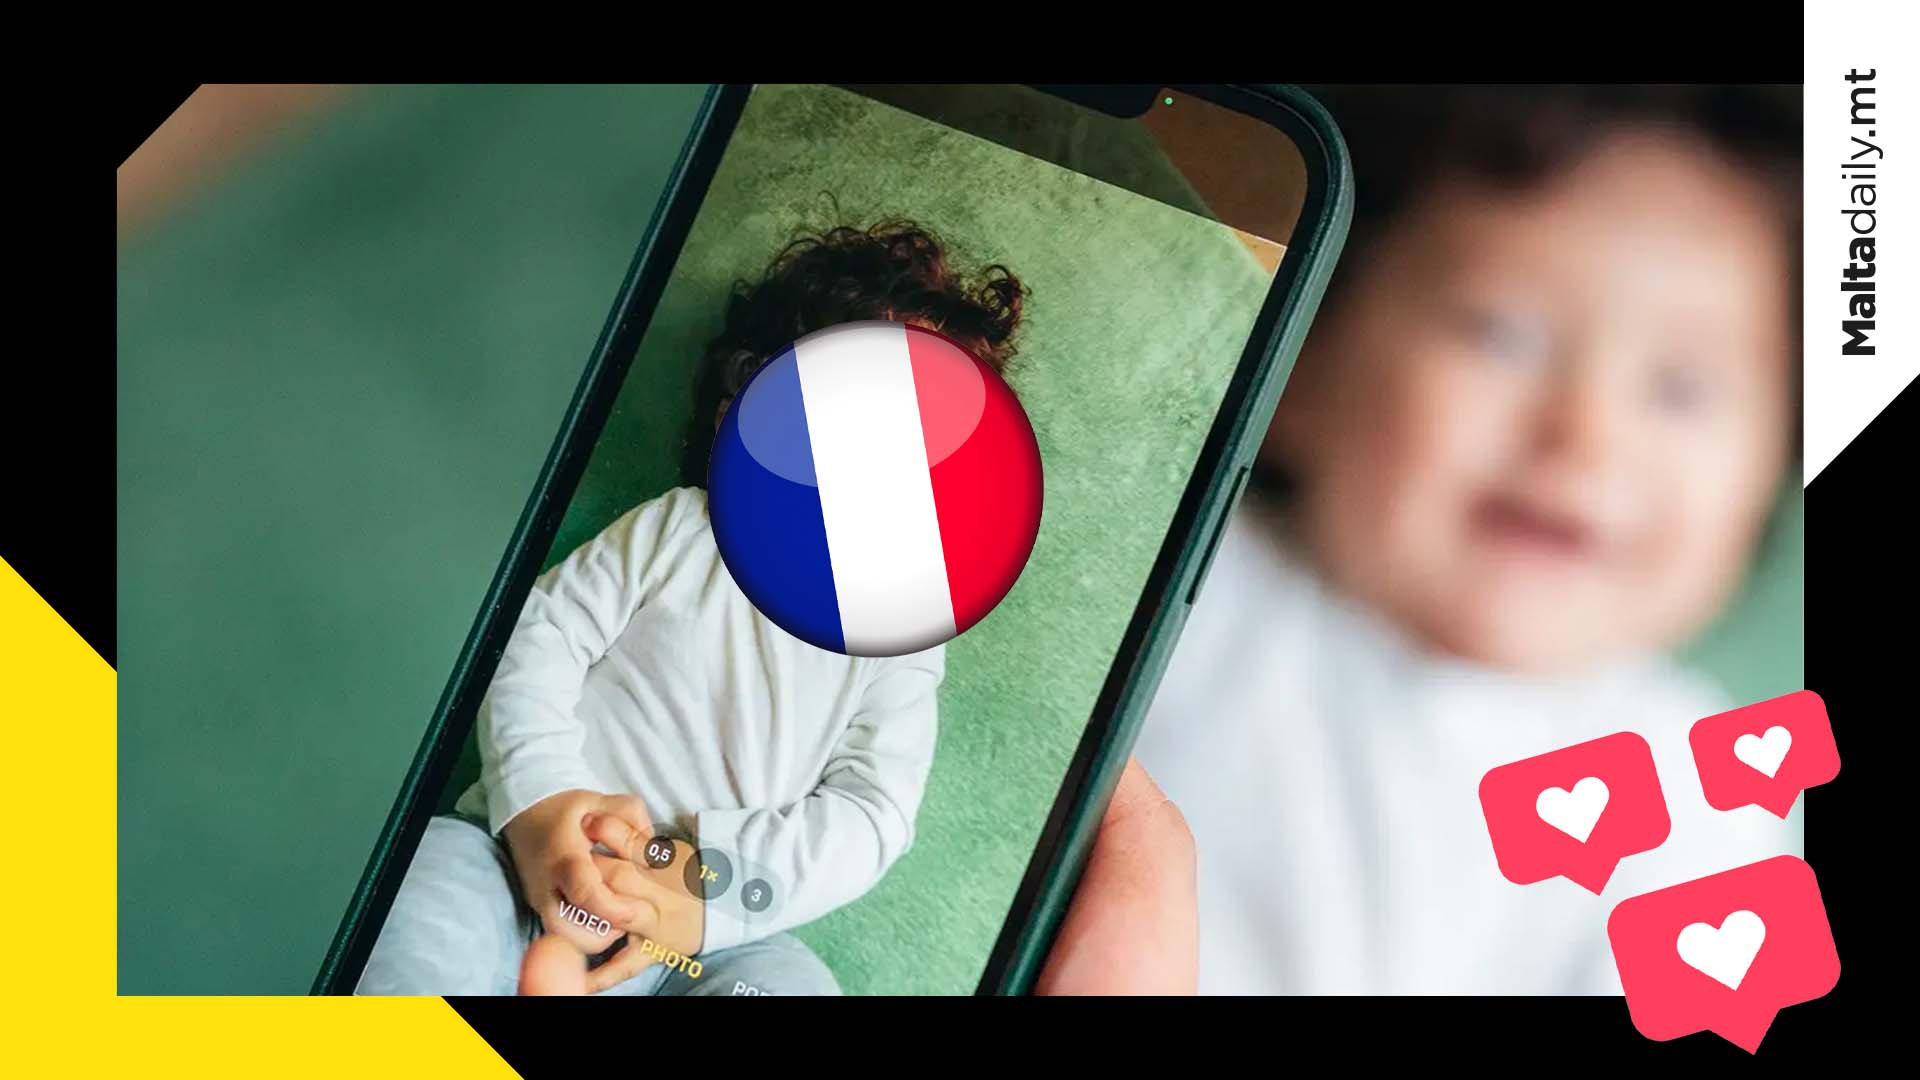 French parents could be banned from over-sharing photos of their kids